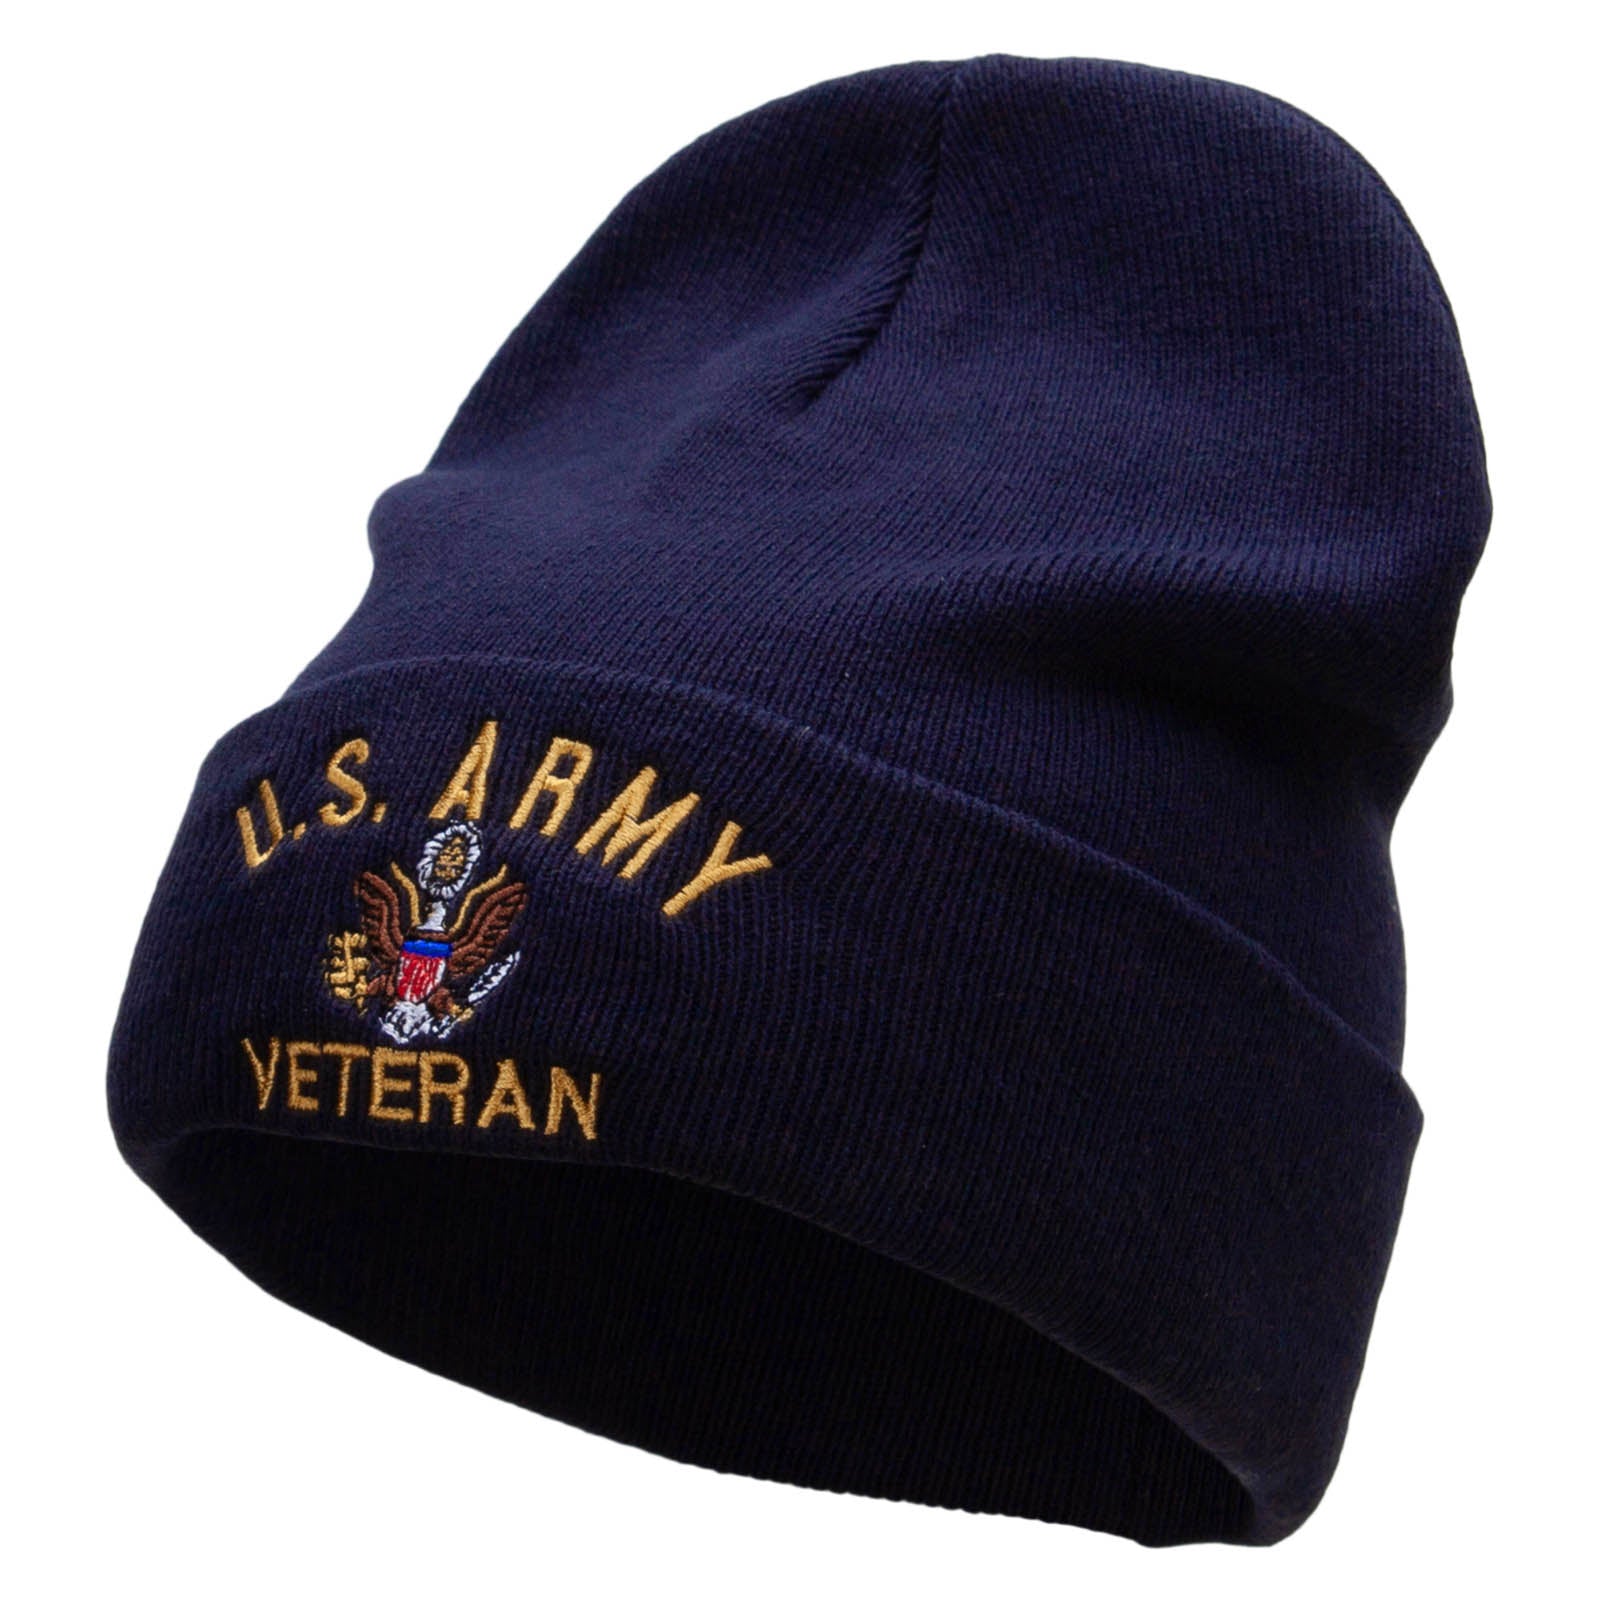 US Army Veteran Embroidered Big Size Long Beanie - Navy XL-3XL